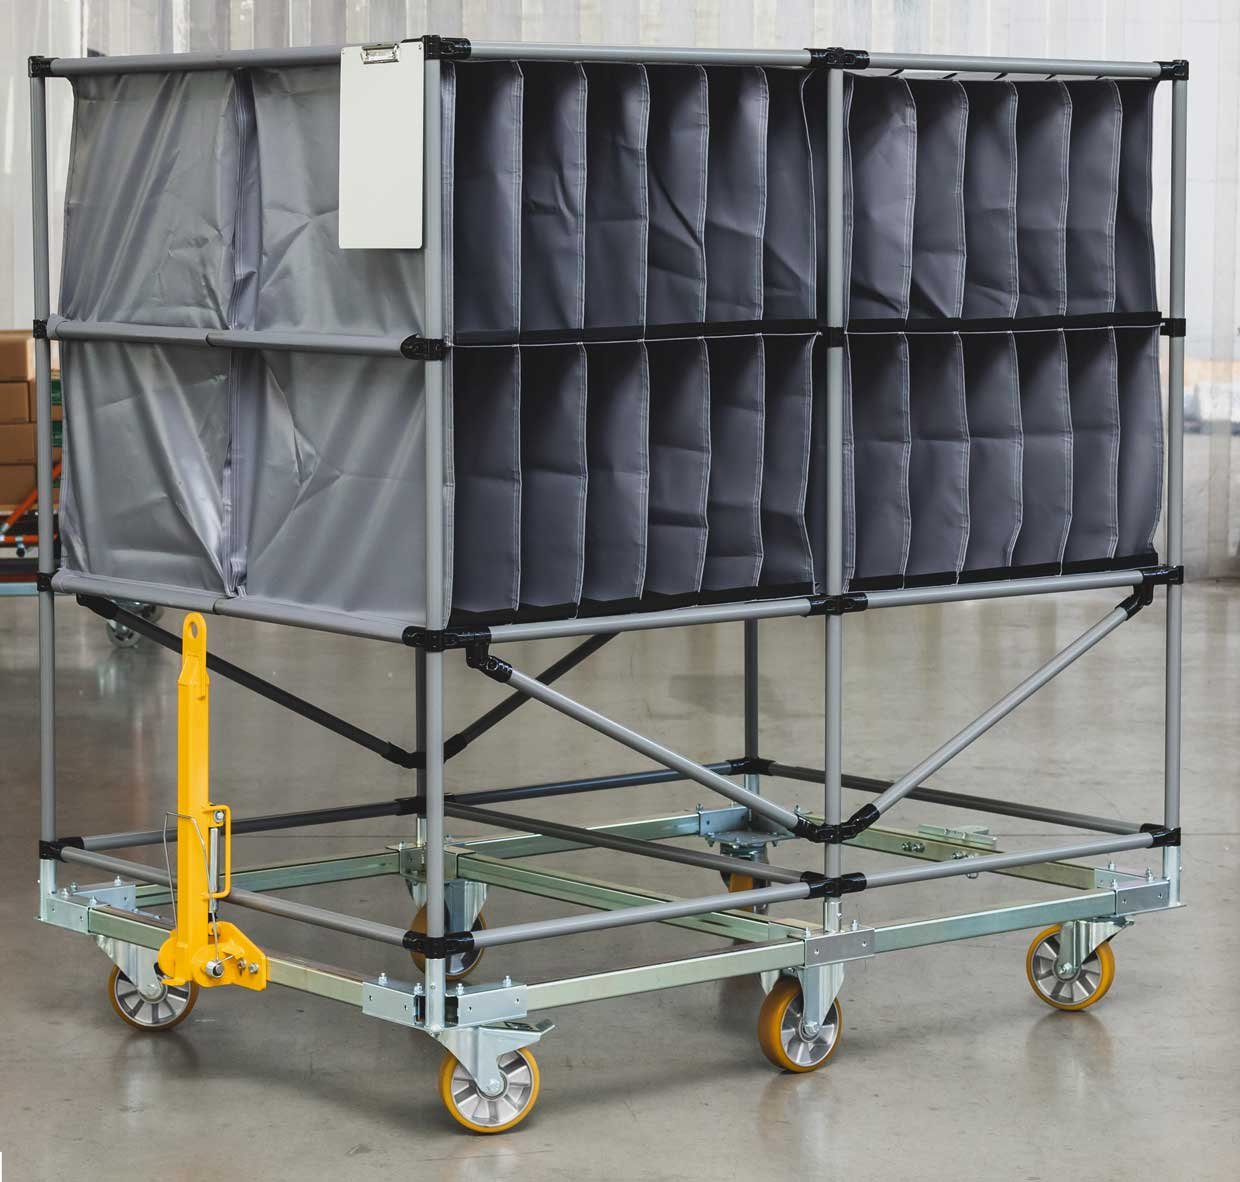 Transport trolley with fabric racks on a chassis frame made of steel square profiles with draw bar